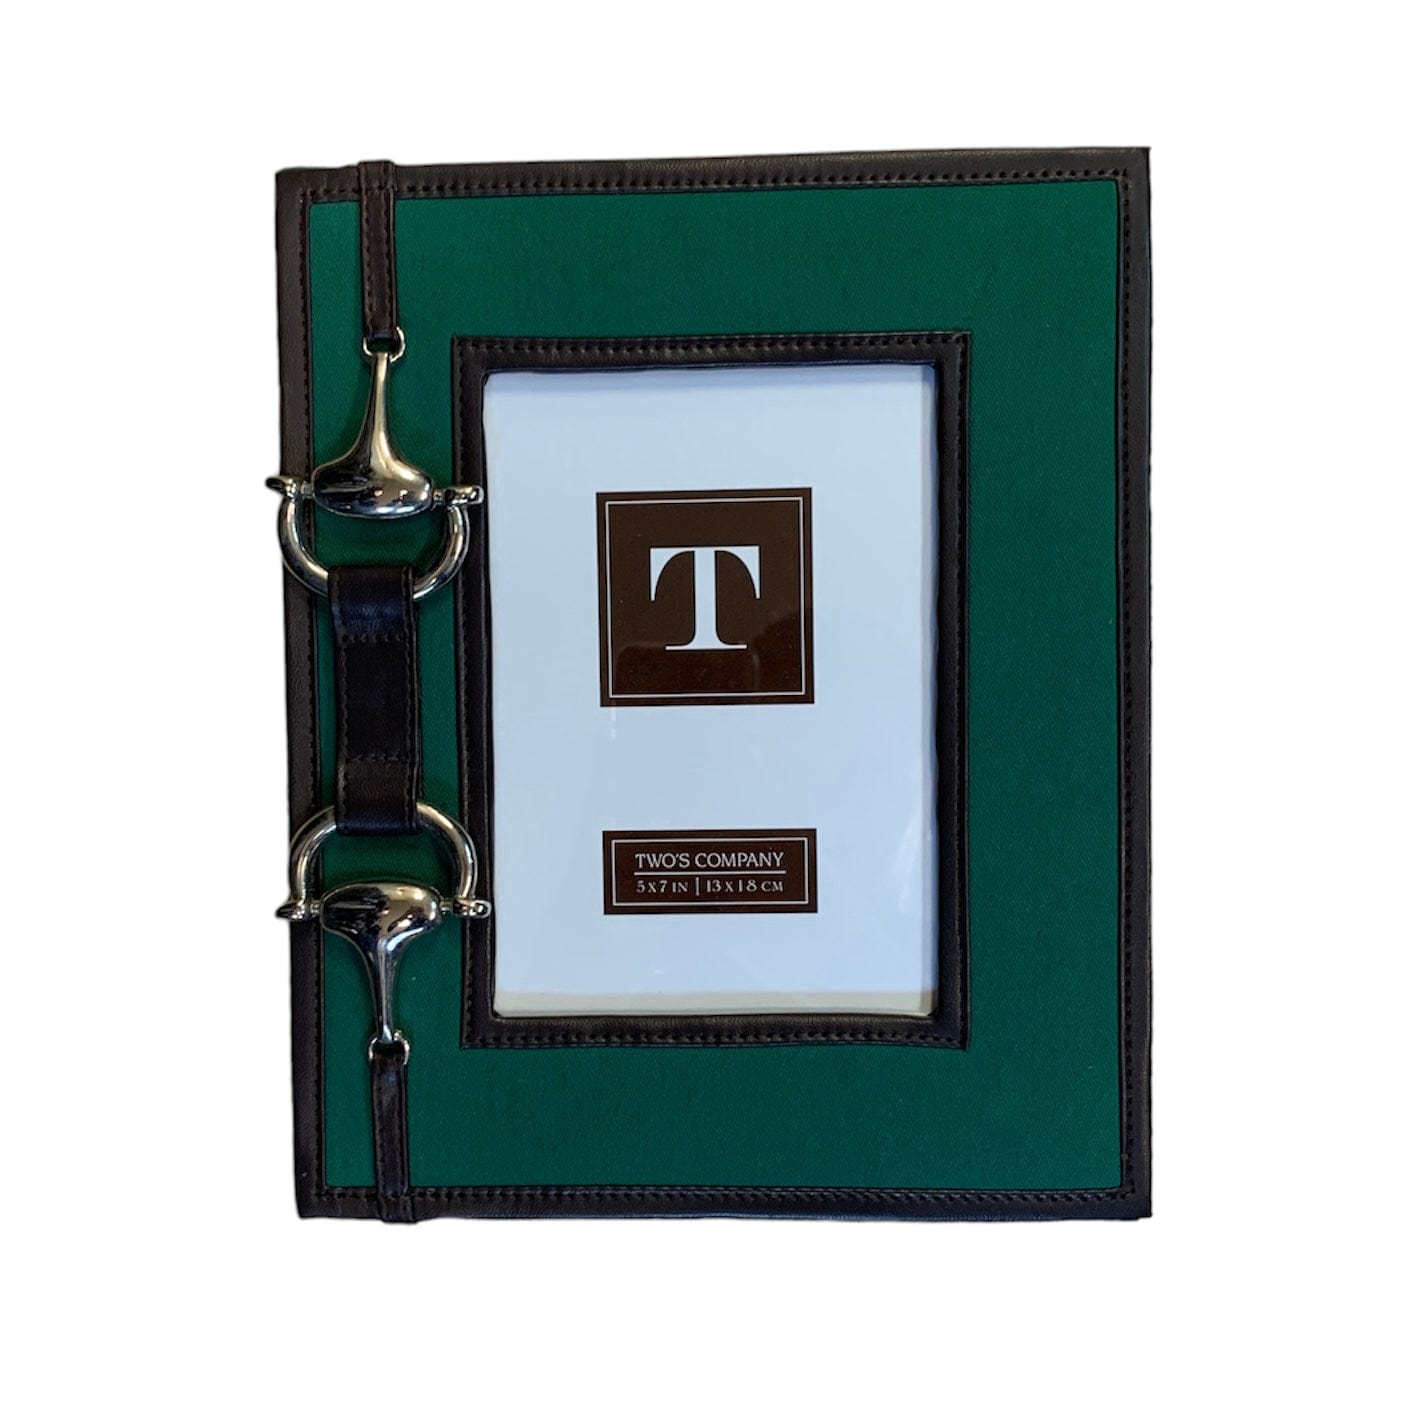 Green Picture frame with brown leather border and snaffle bit decoration on left side of frame. 